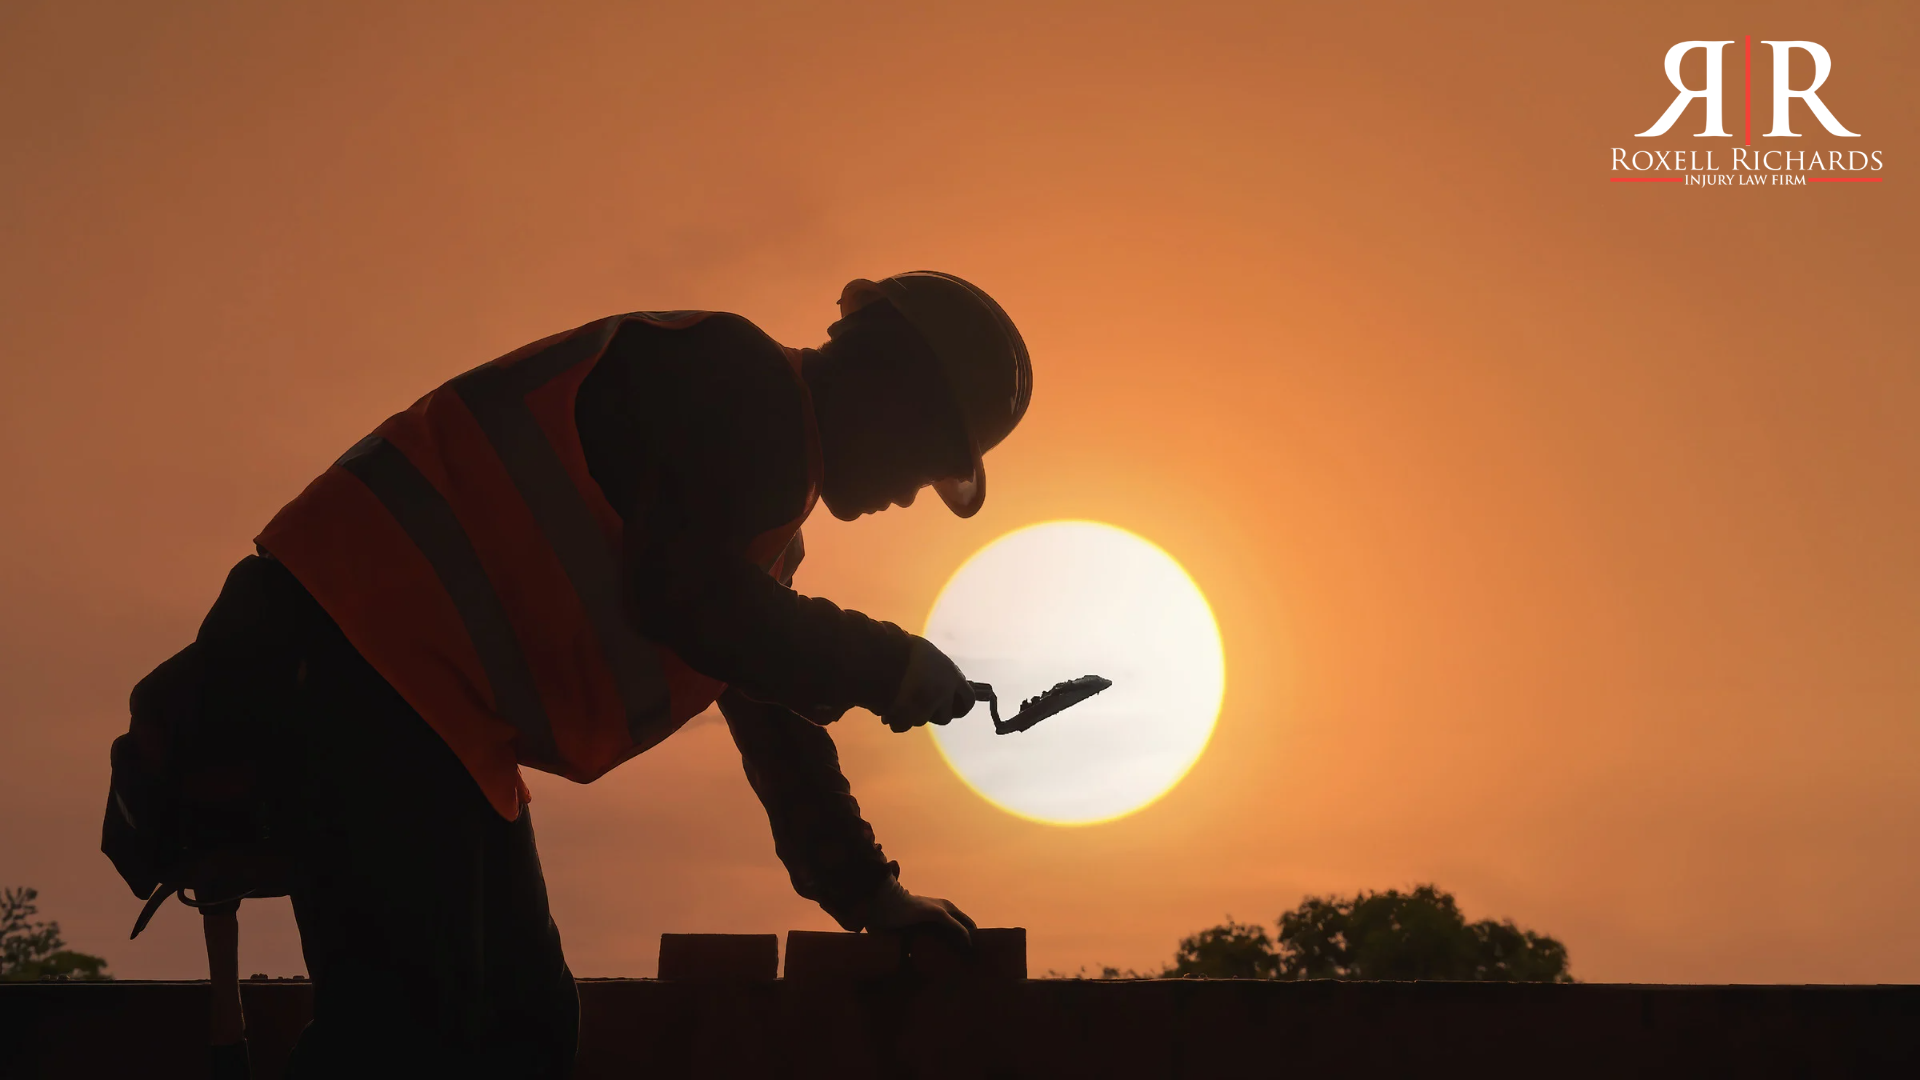 Worker’s Compensation: Injured Employee Rights in Texas